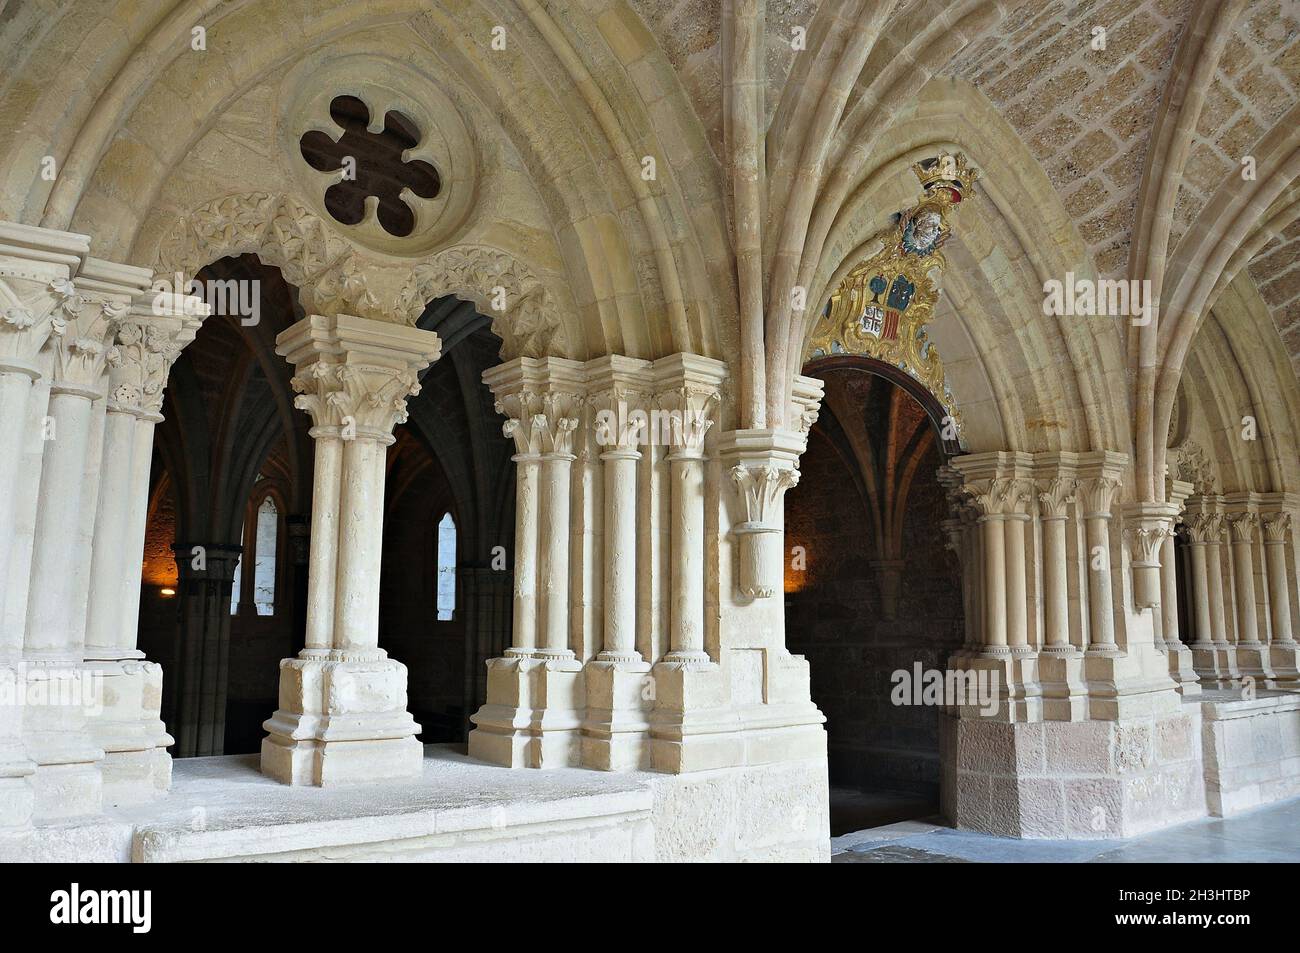 Chapter House of the stone monastery in Nuevalos of the Calatayud region, Aragon, Spain Stock Photo